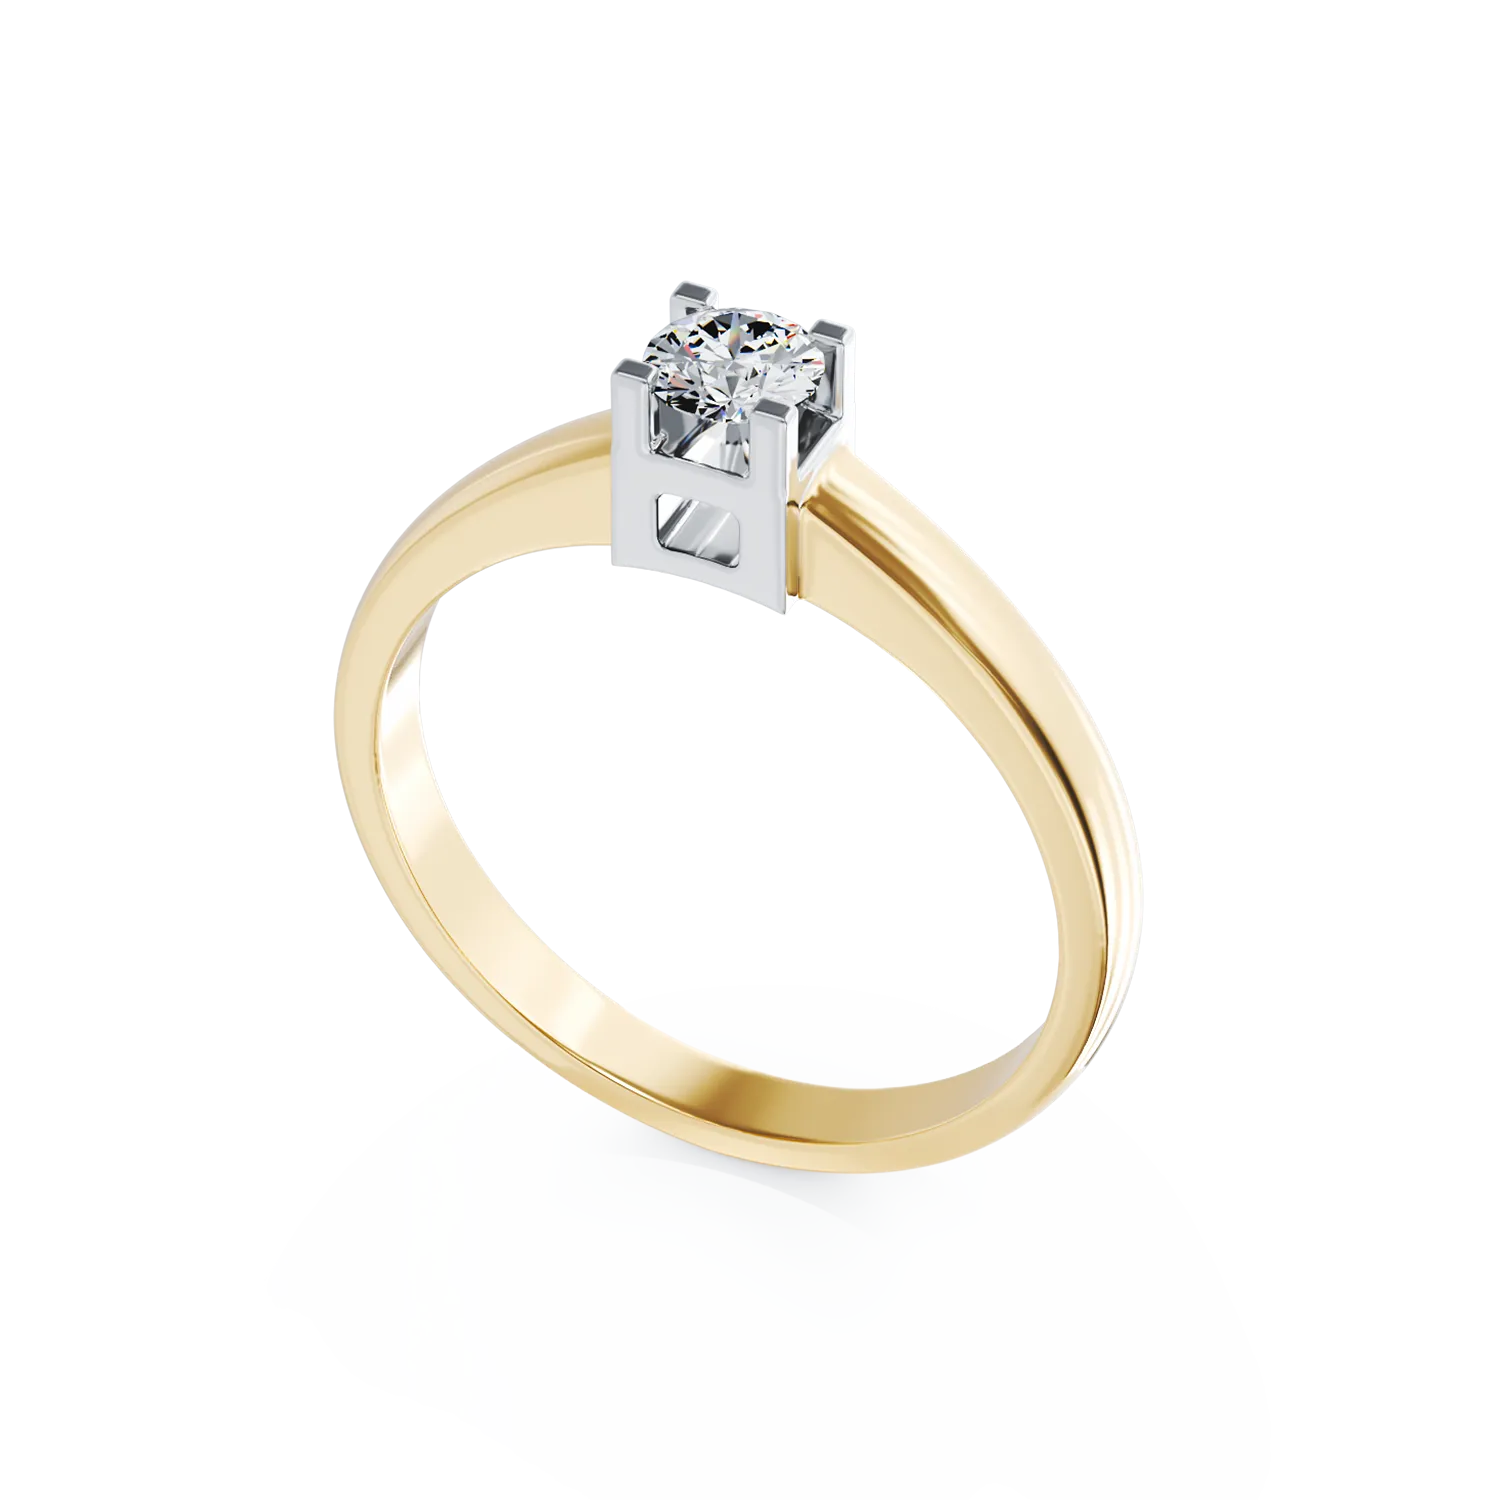 18K yellow gold engagement ring with 0.31ct solitaire diamond